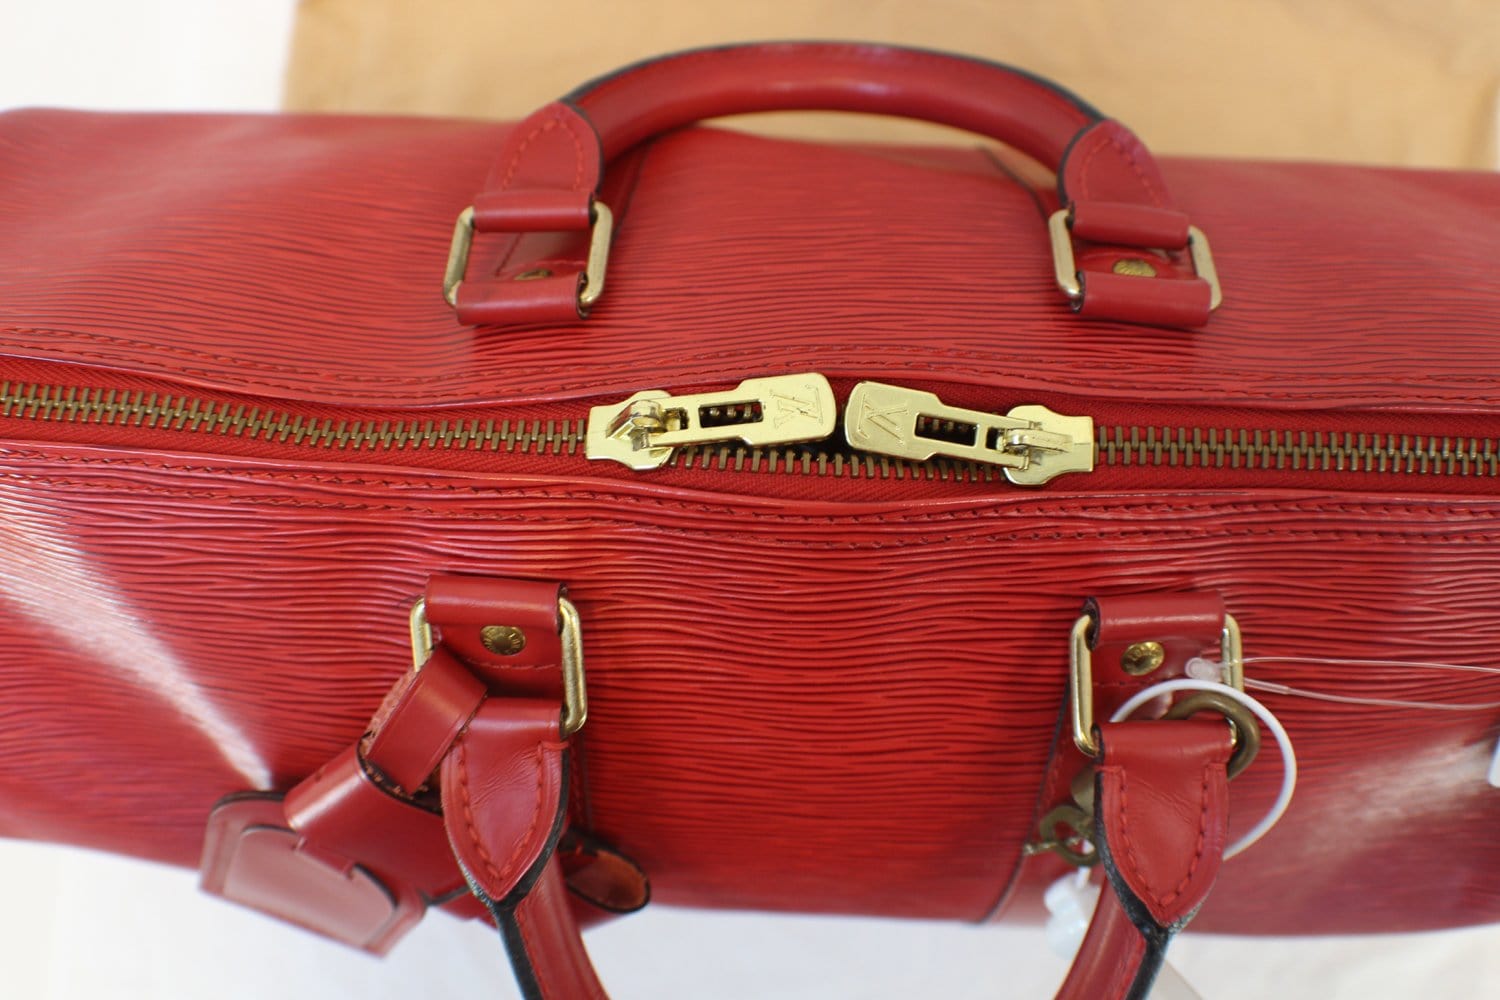 Louis Vuitton Red Epi Leather Keepall 45 Weekender Overnight Bag